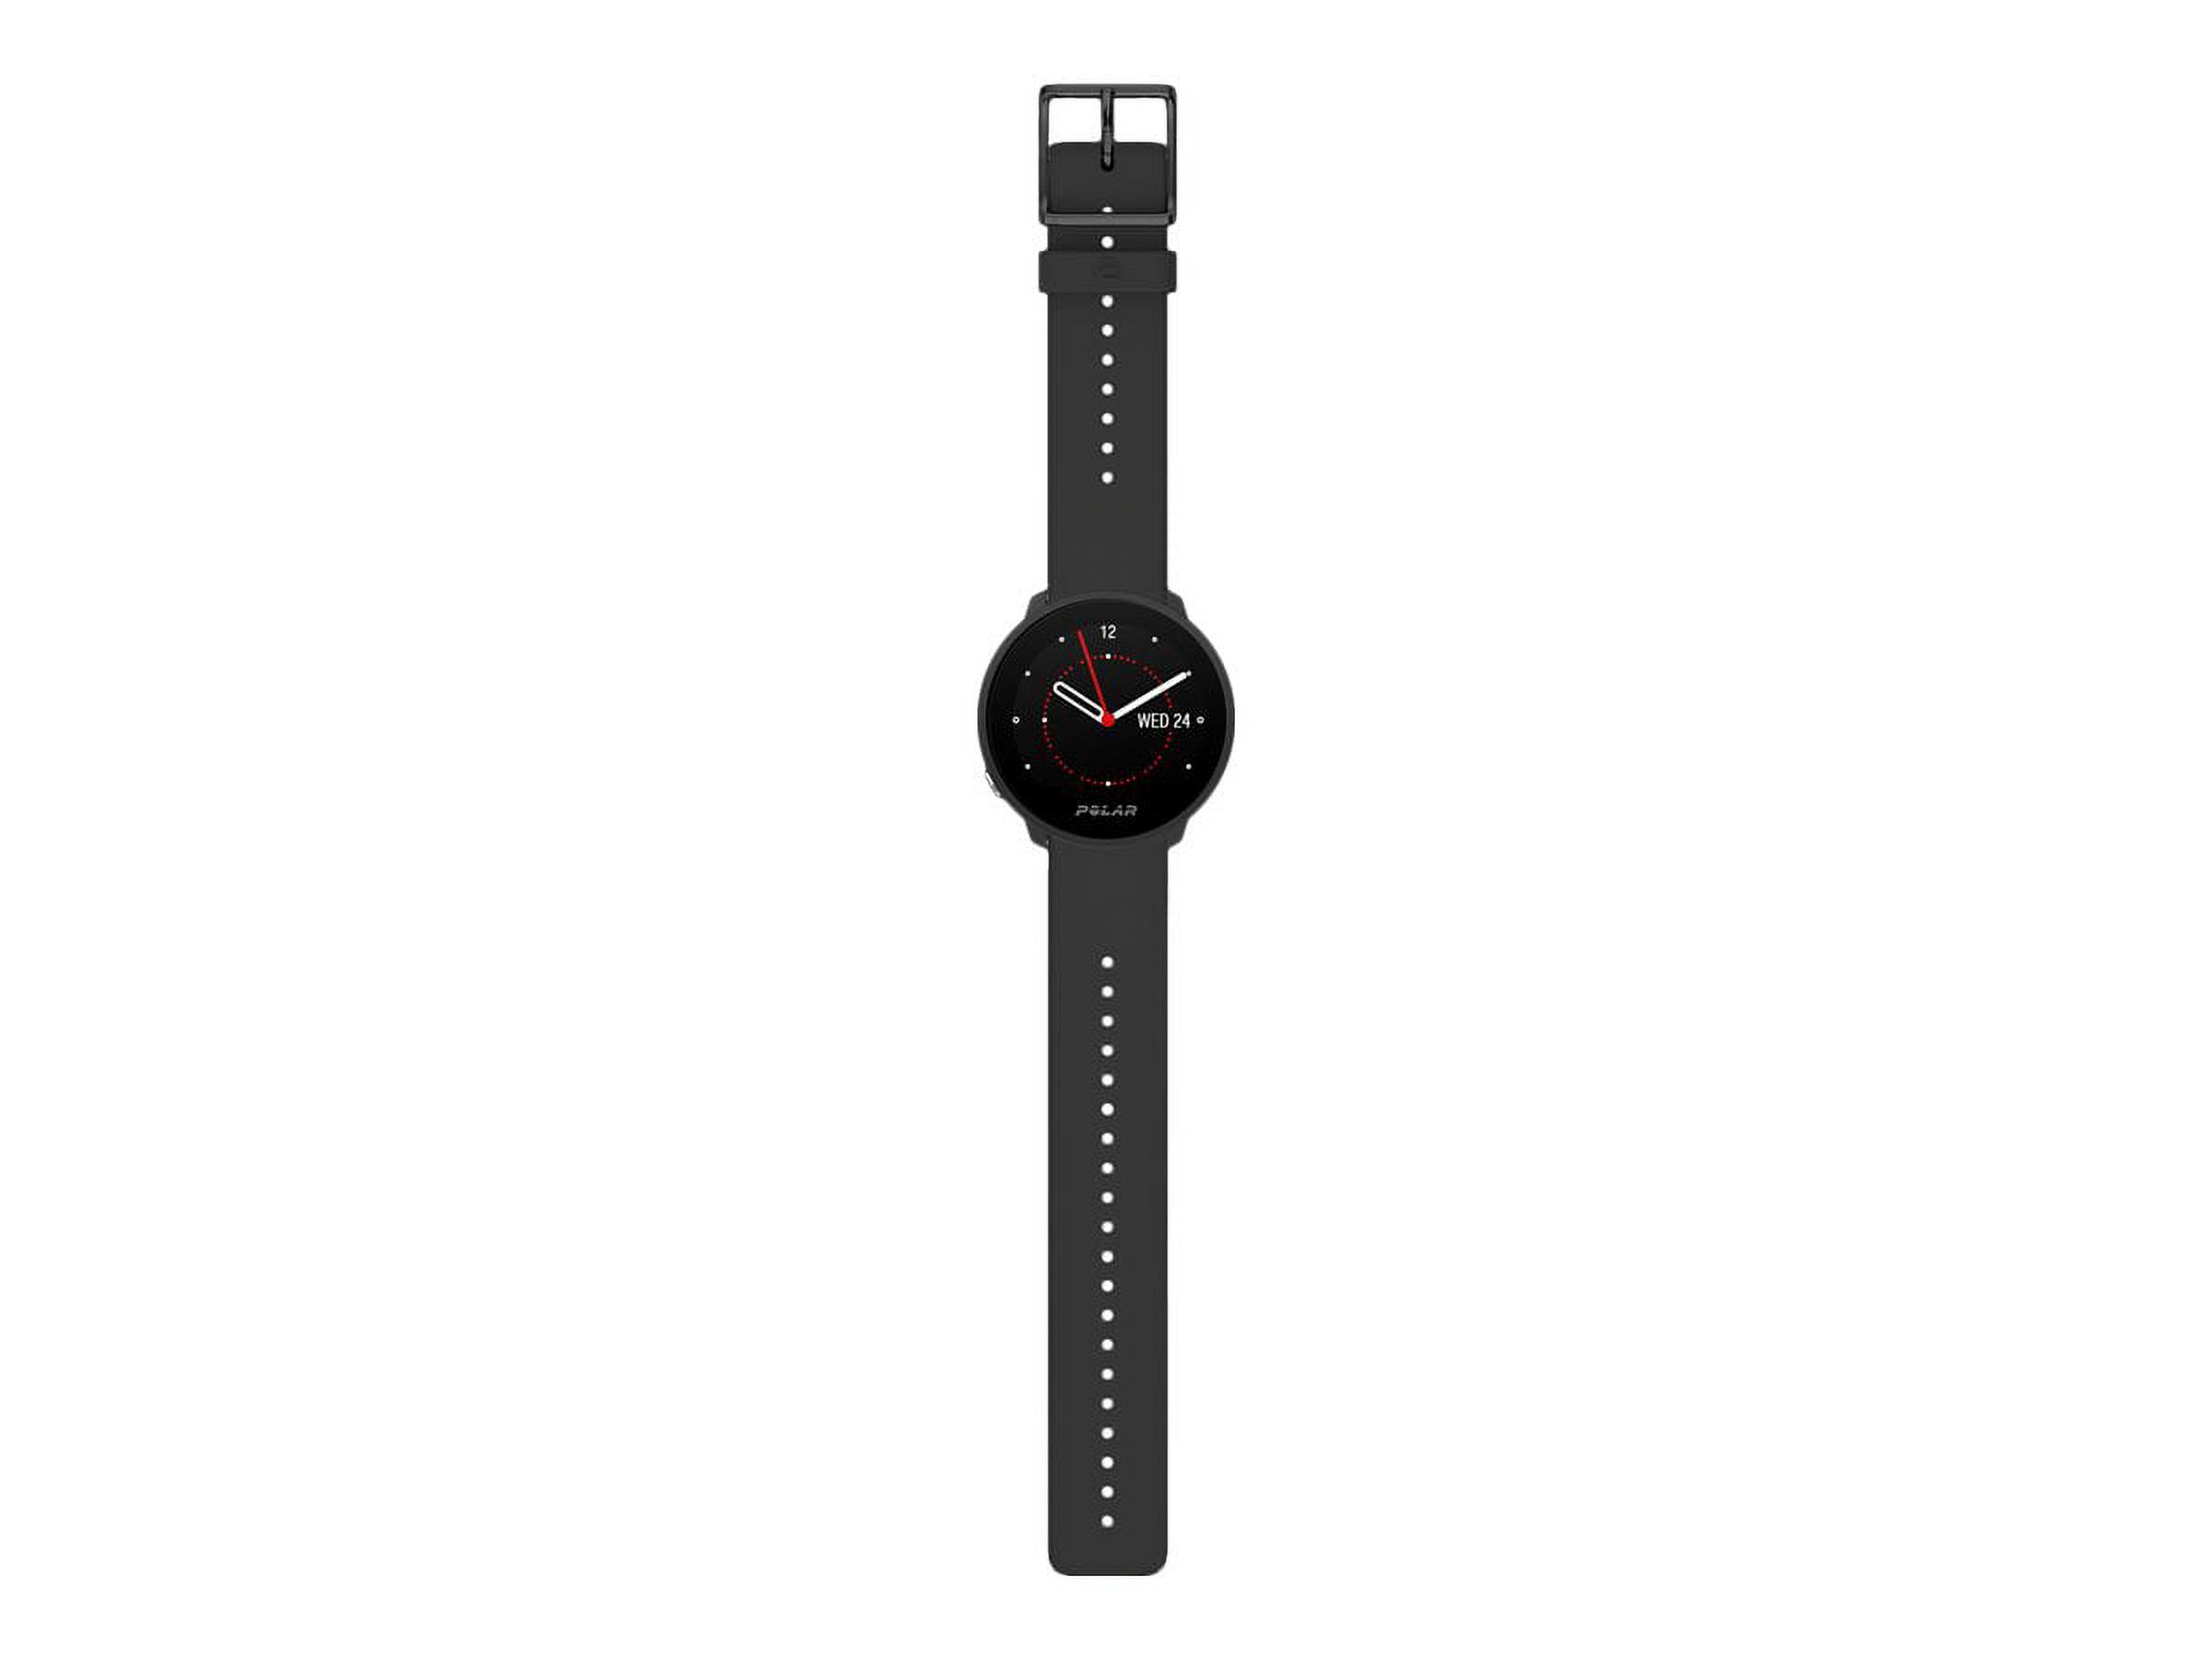 Polar Unite - Sport watch with band - silicone - black - band size: S/L - Bluetooth - 1.13 oz - image 1 of 10